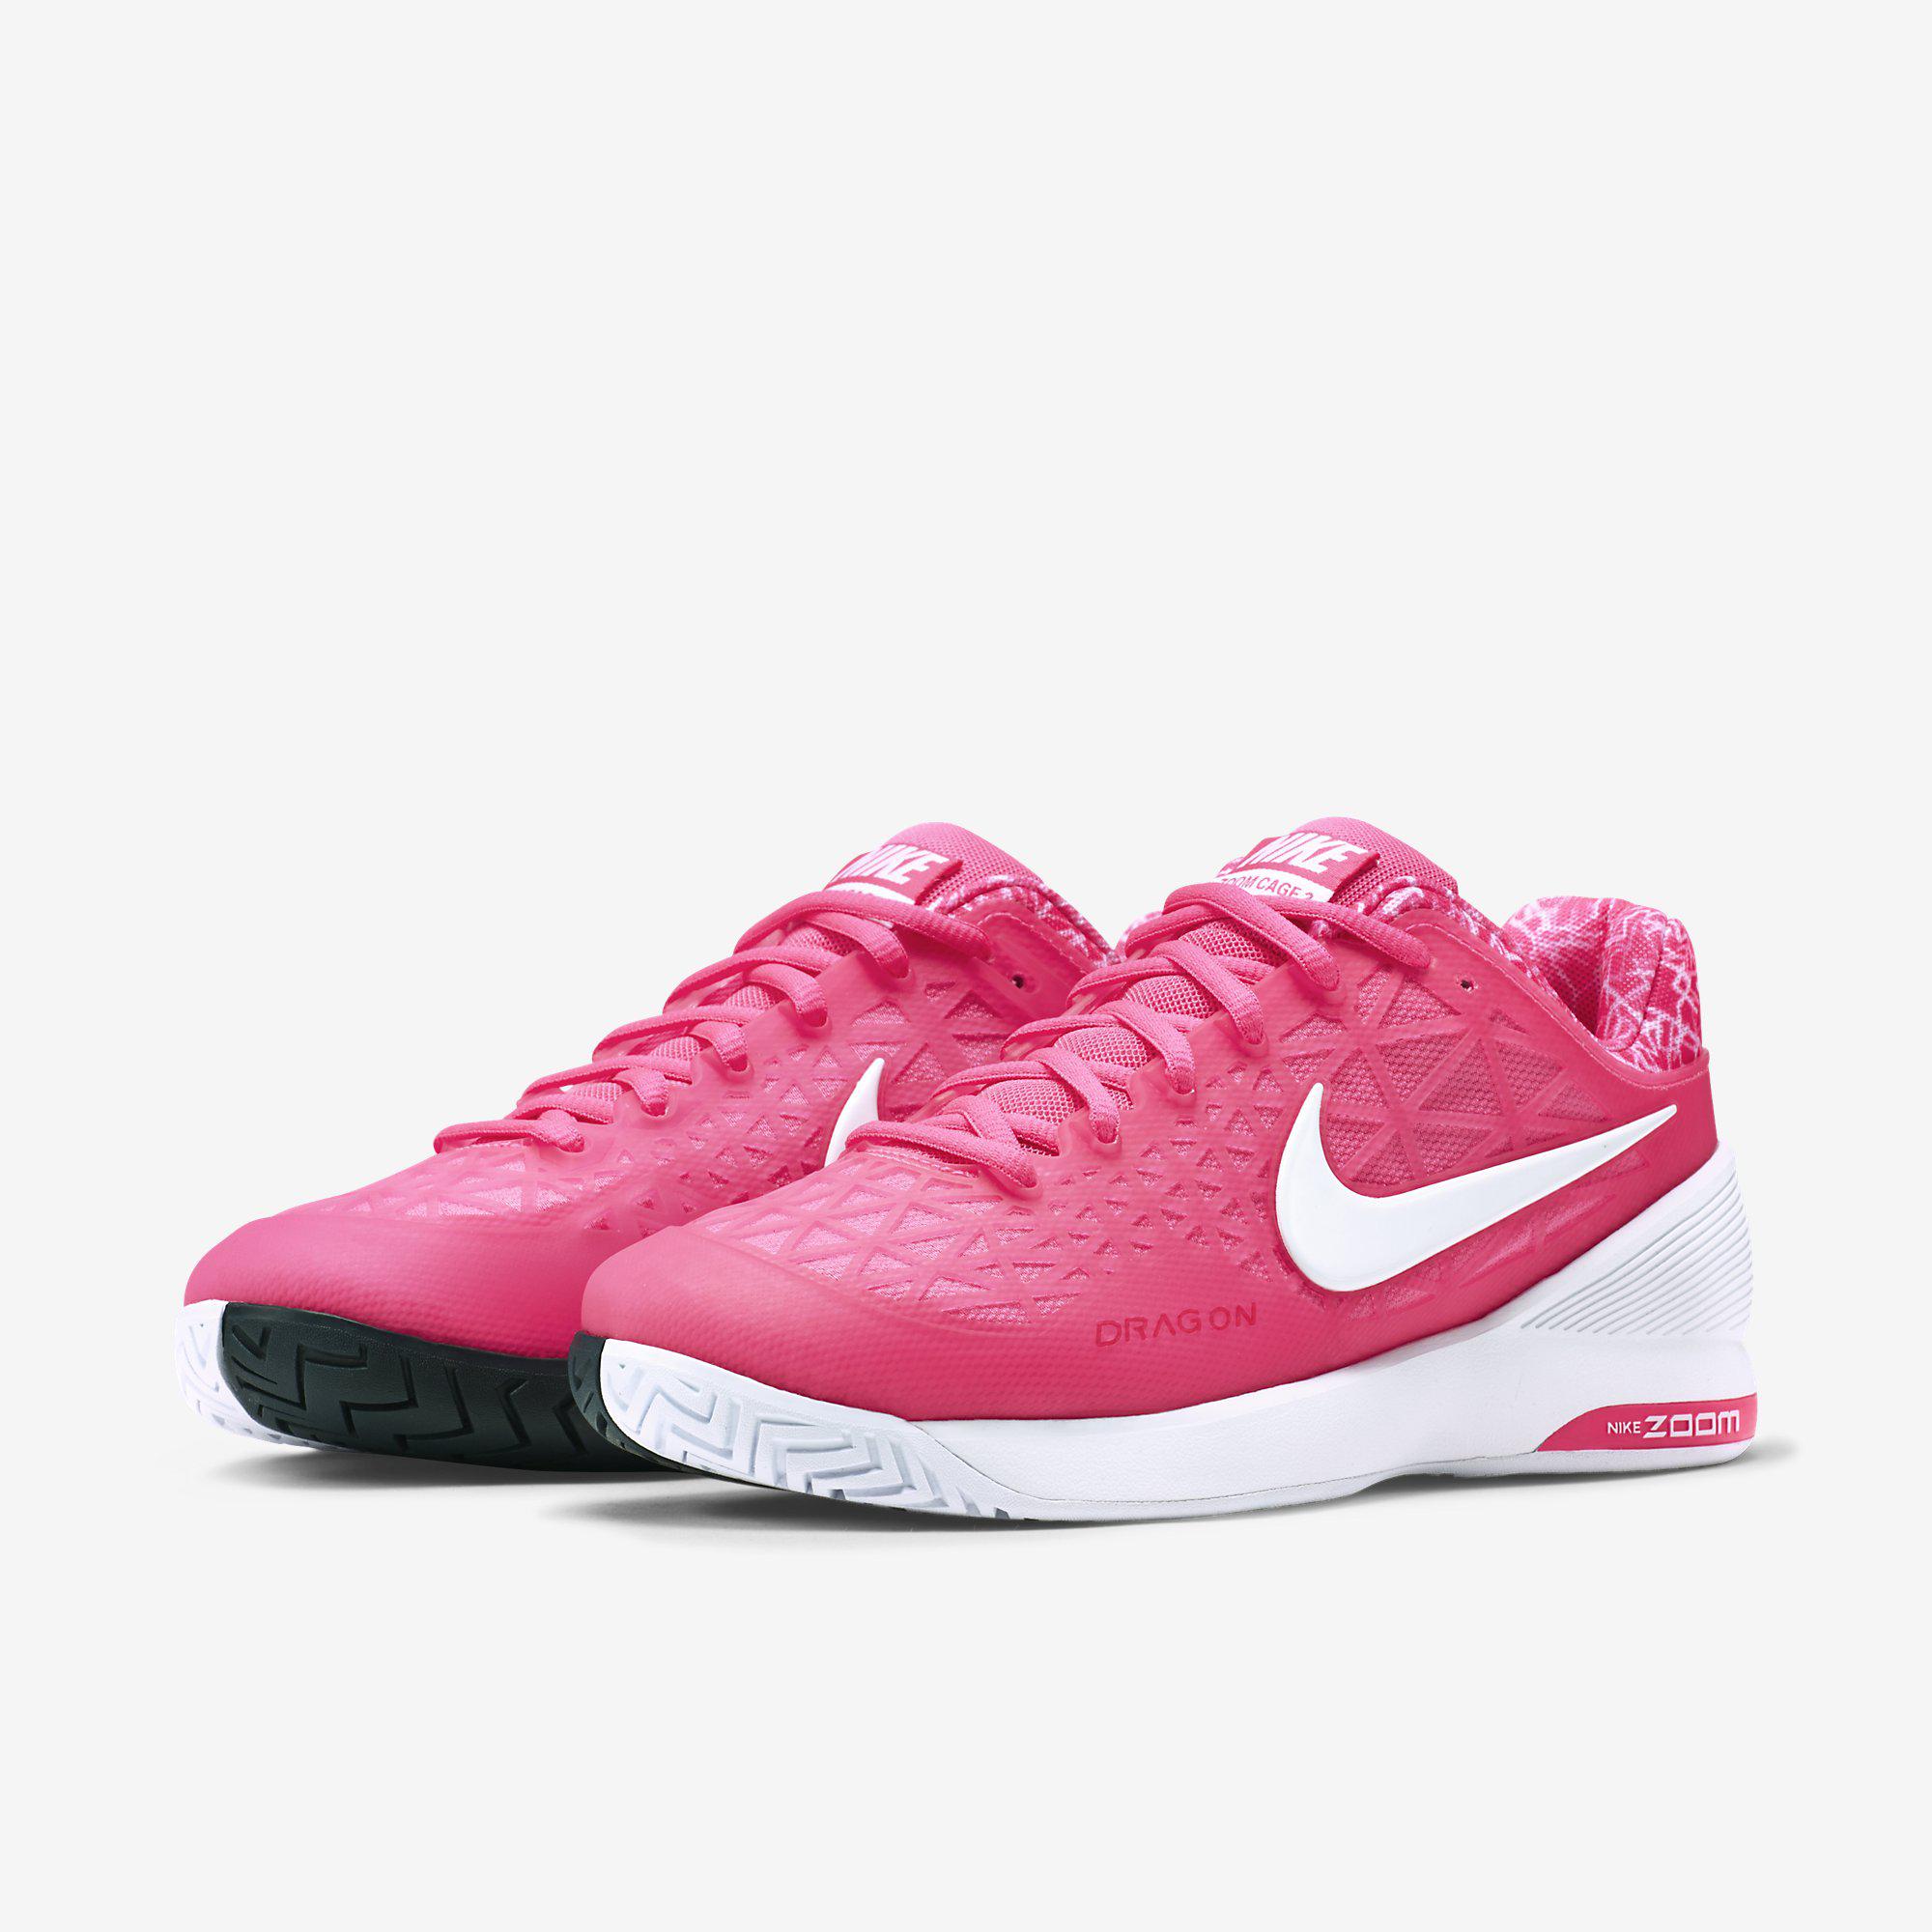 nike cage 2 womens tennis shoes